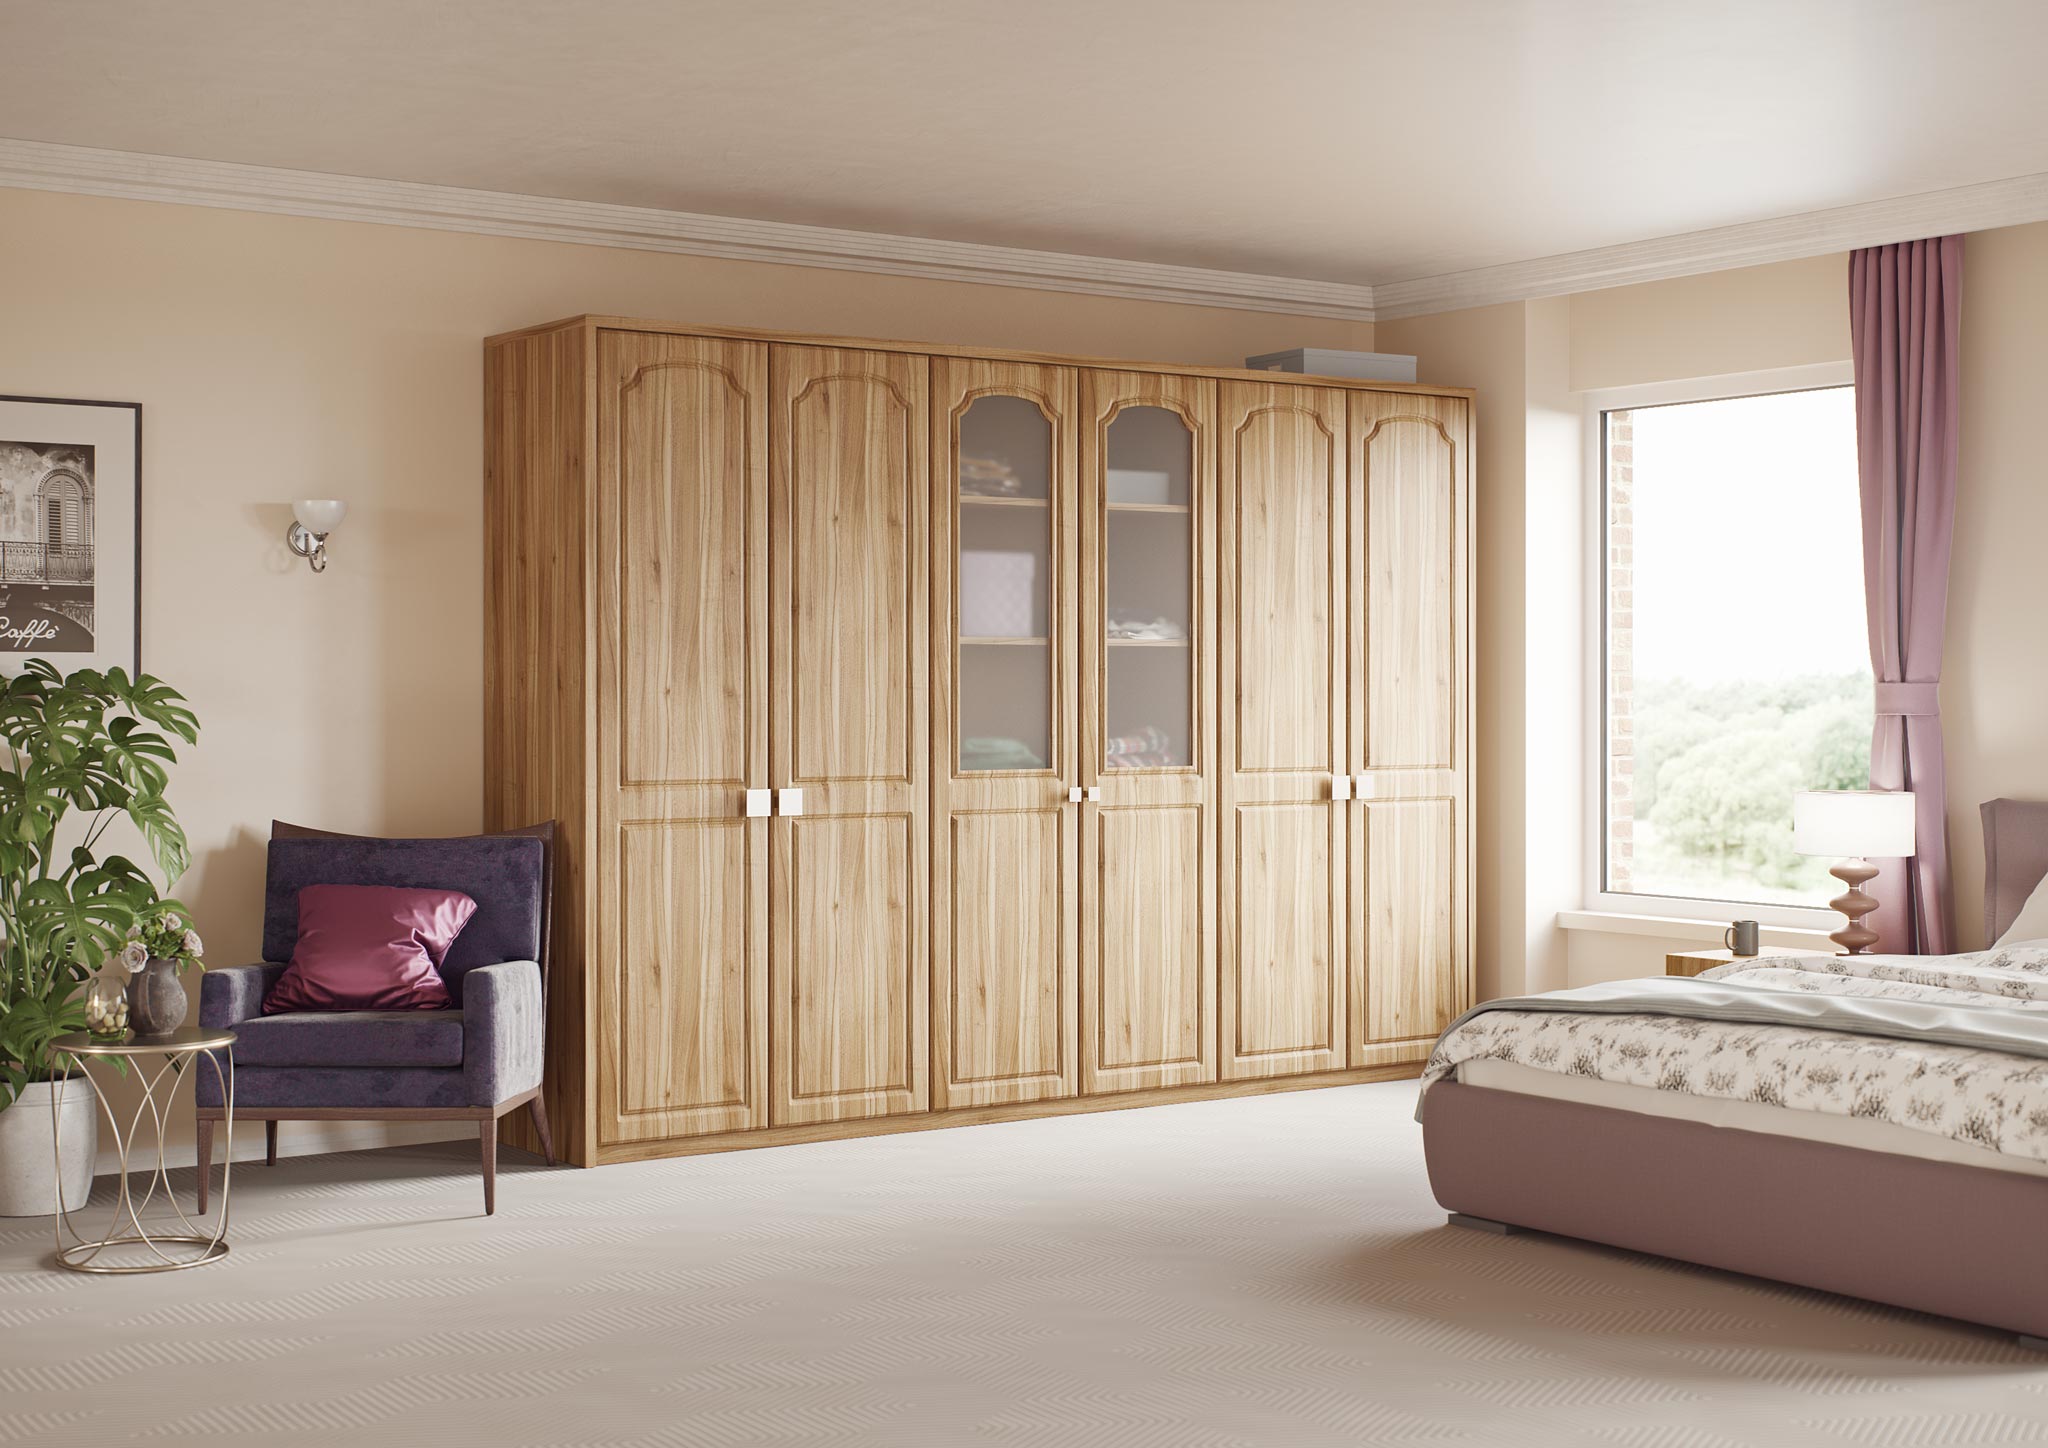 Traditional Chedburgh style wardrobe in any colour